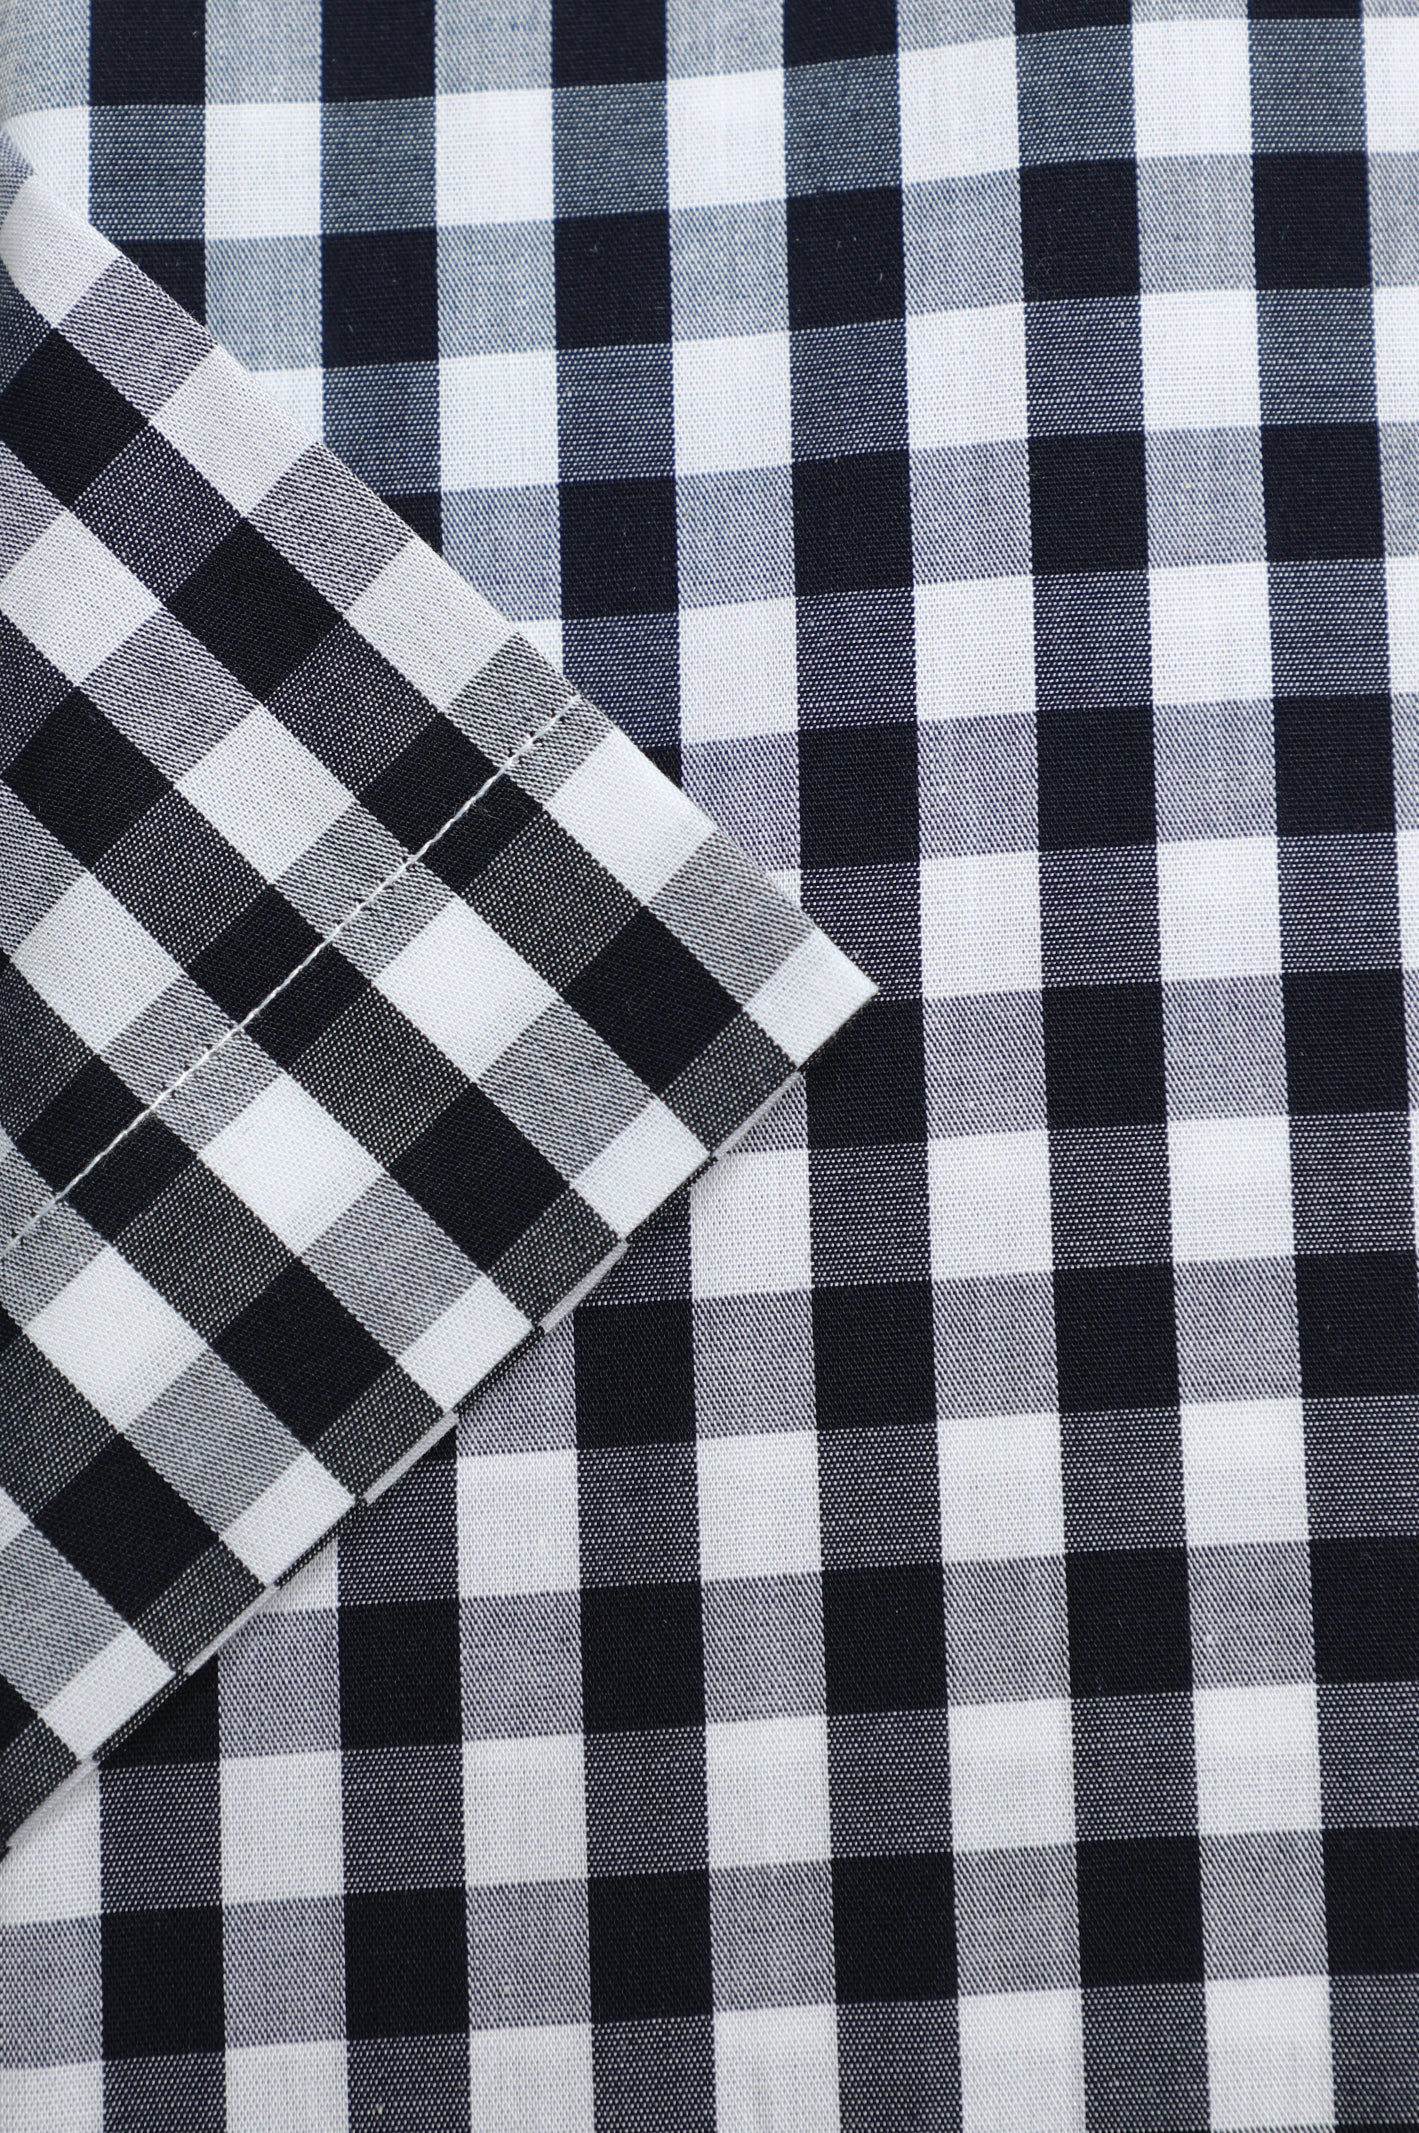 Black Gingham Check Formal Shirt (Half Sleeves) From Diners